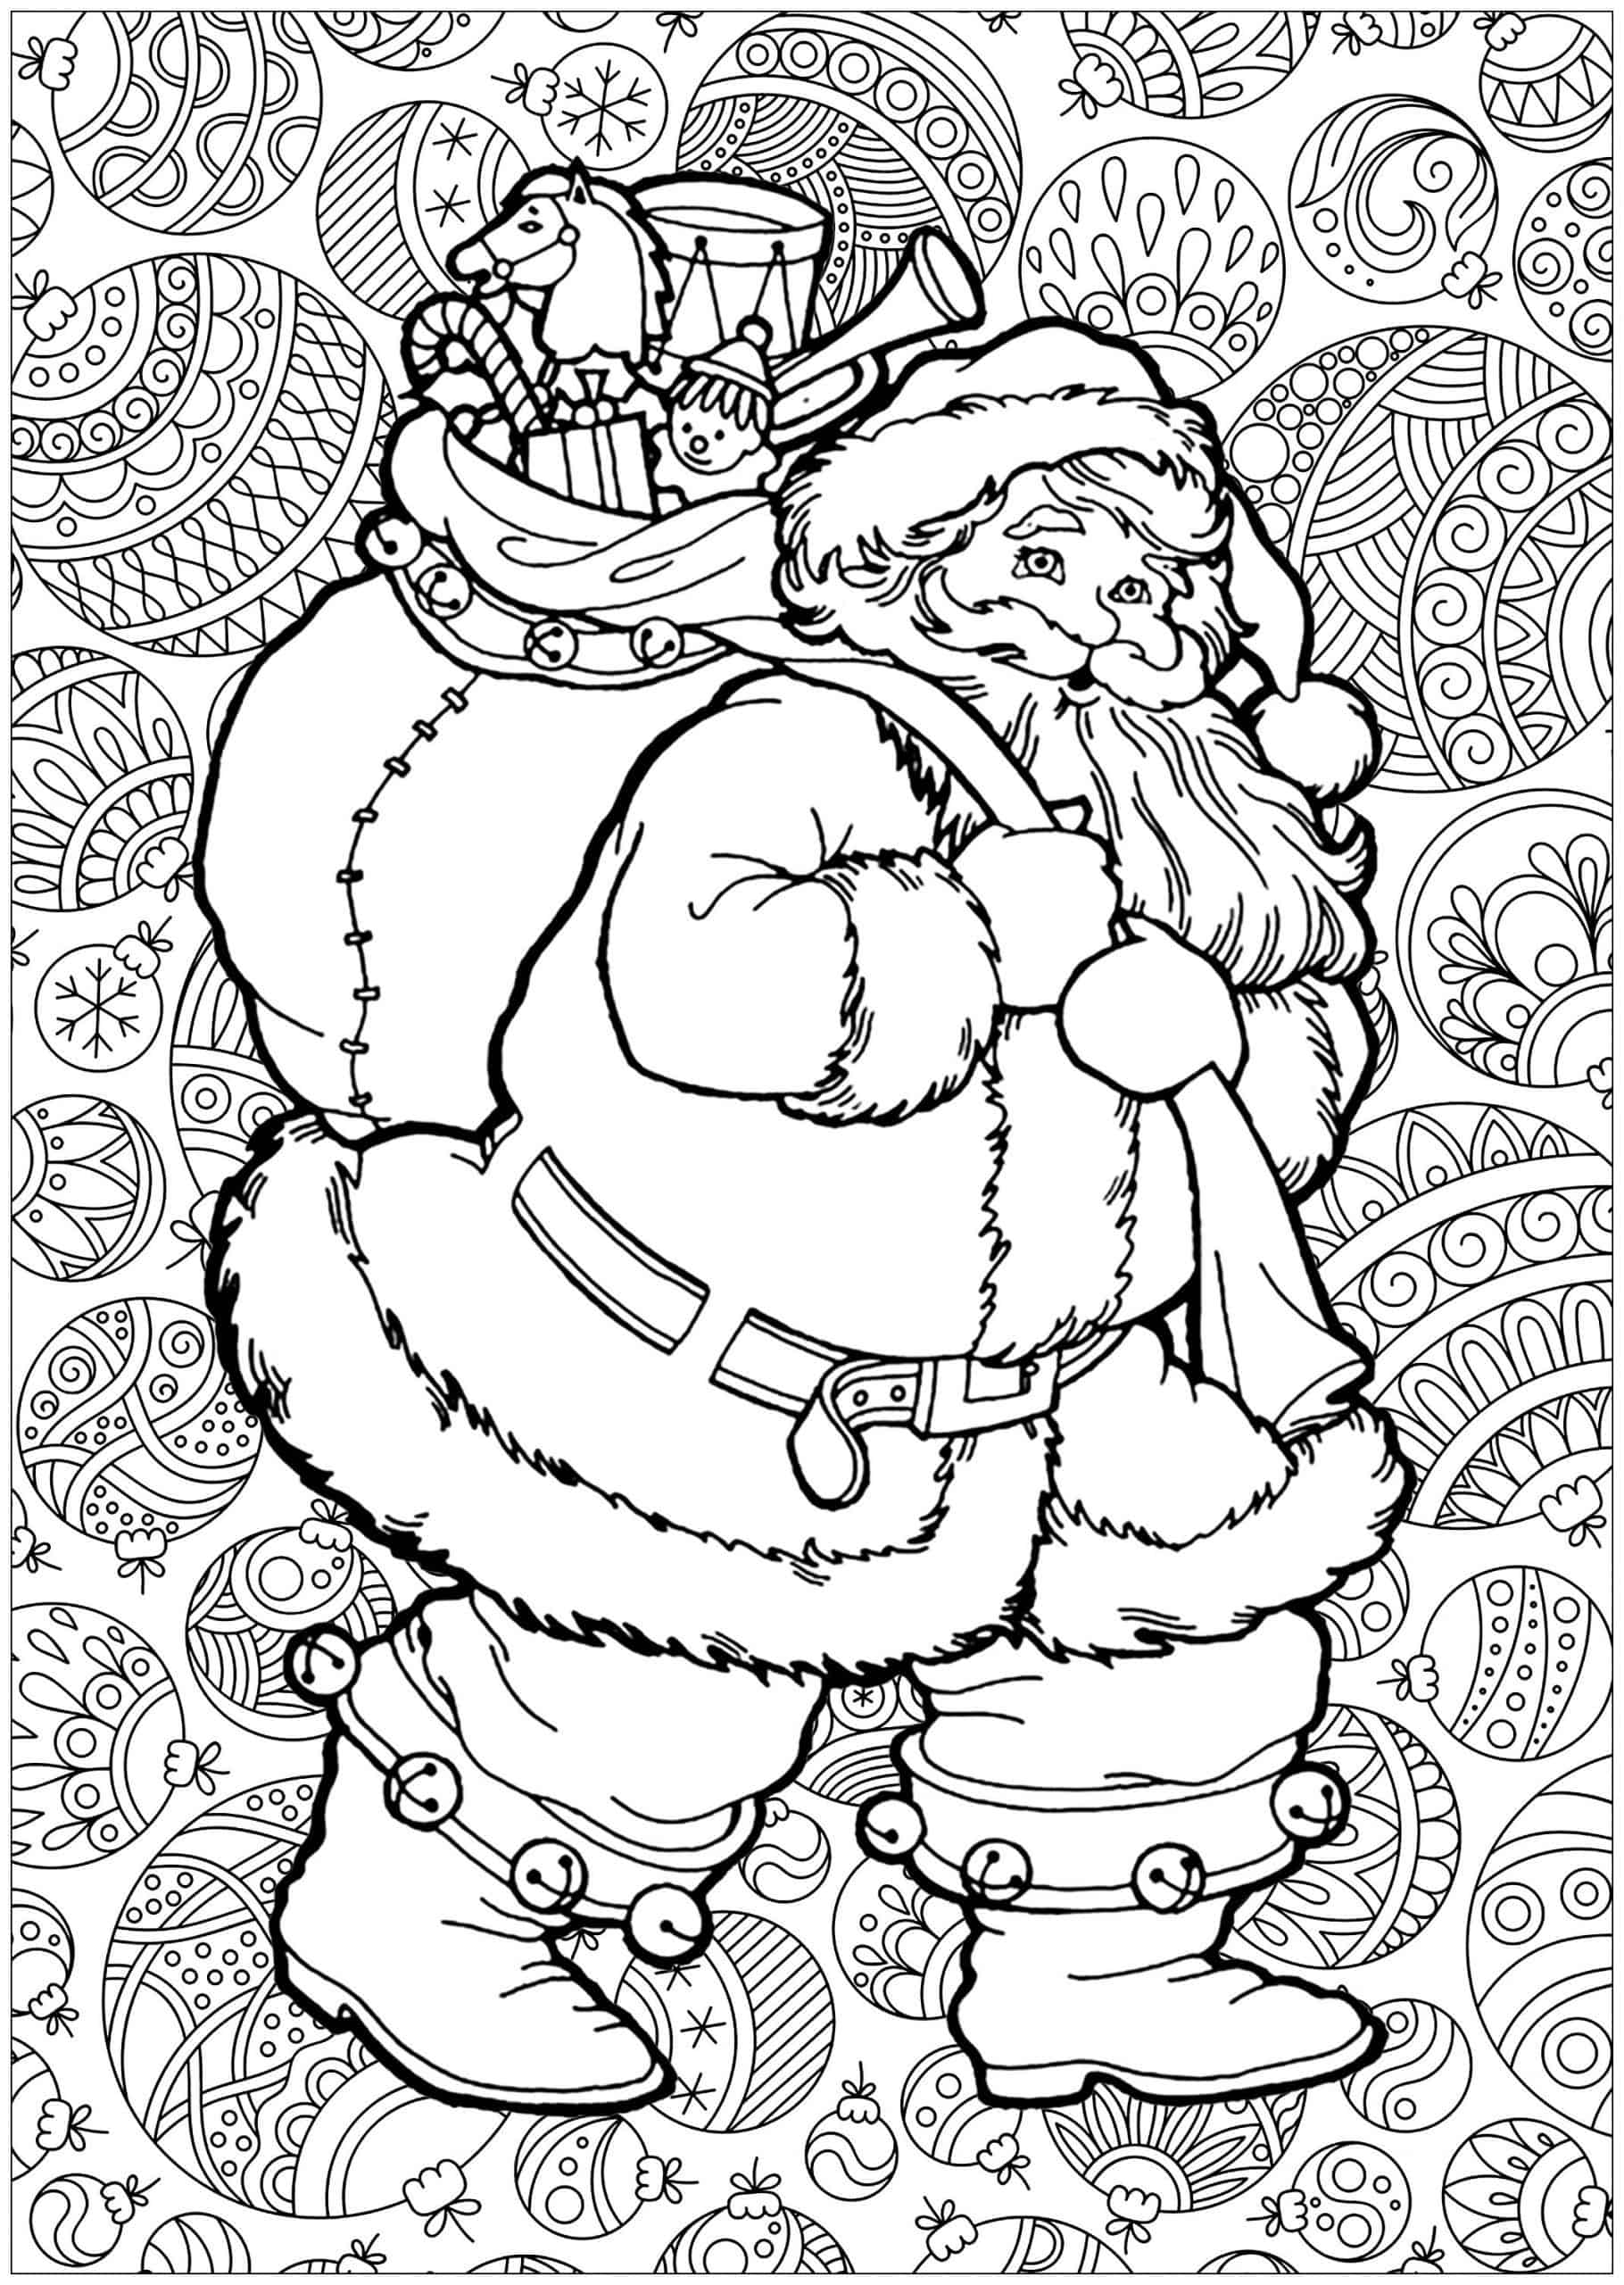 20 Free Adult Christmas Coloring Pages Printables   Artsy Pretty ...